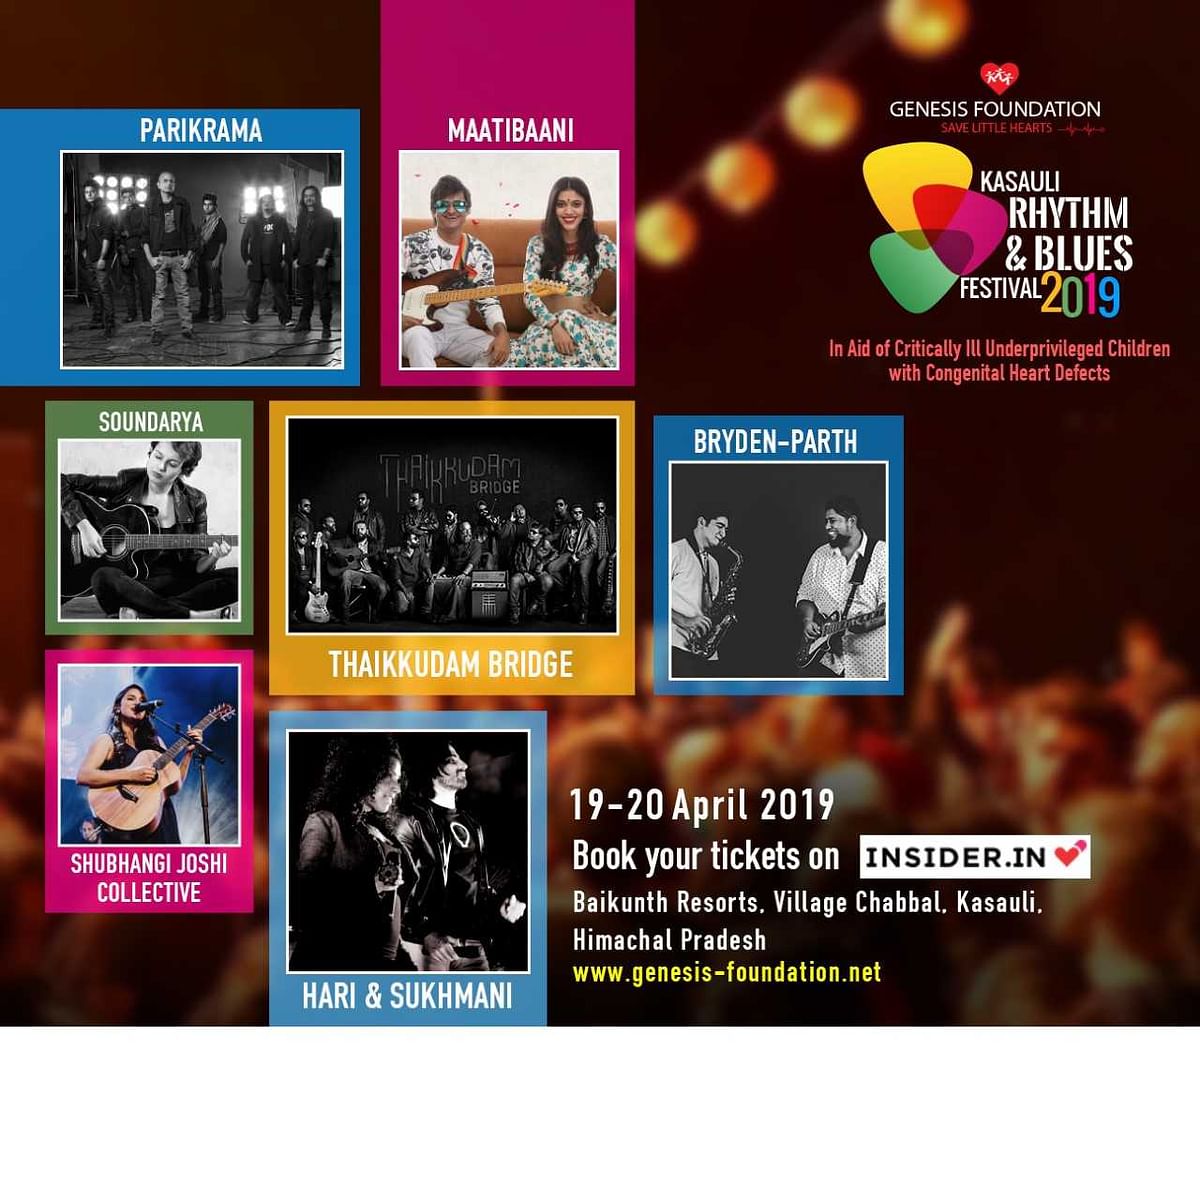 Kasauli Music Festival has all your favourite bands on Easter Weekend